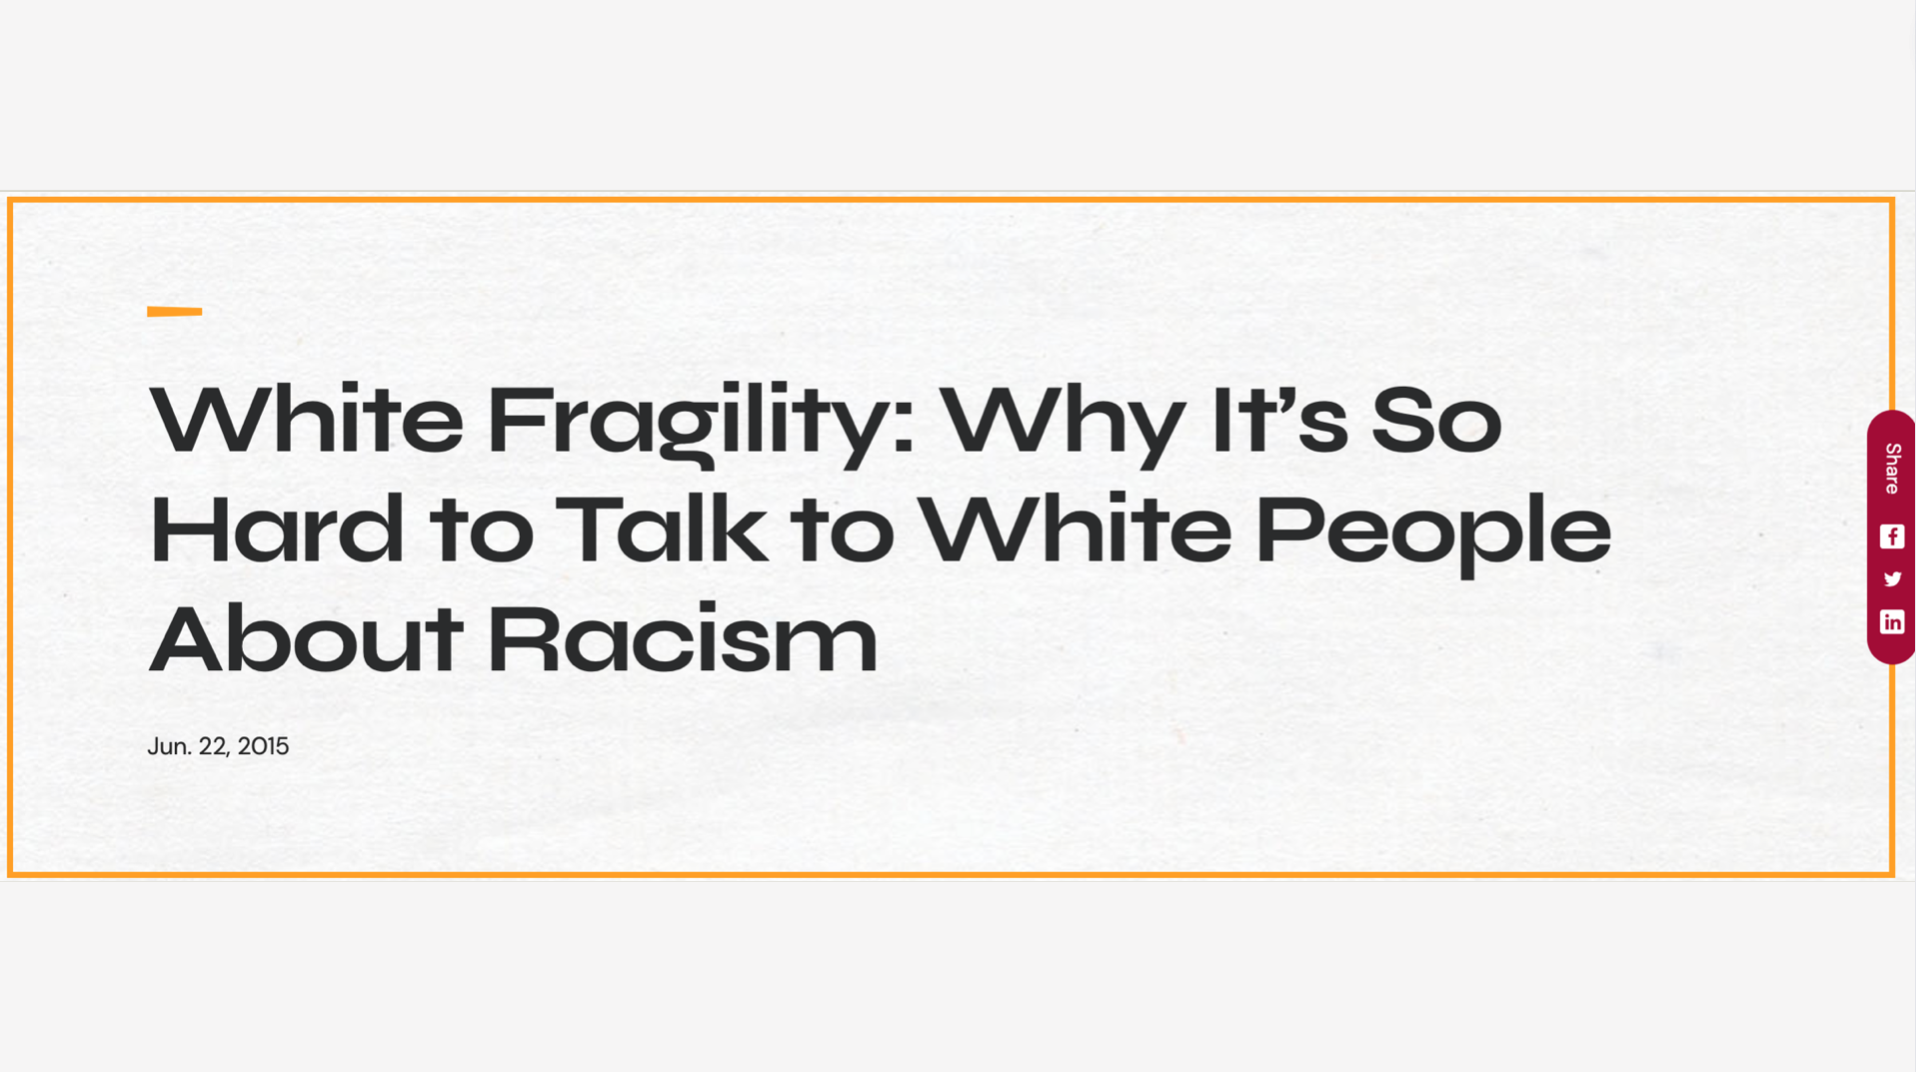 White Fragility: Why It’s So Hard to Talk to White People About Racism